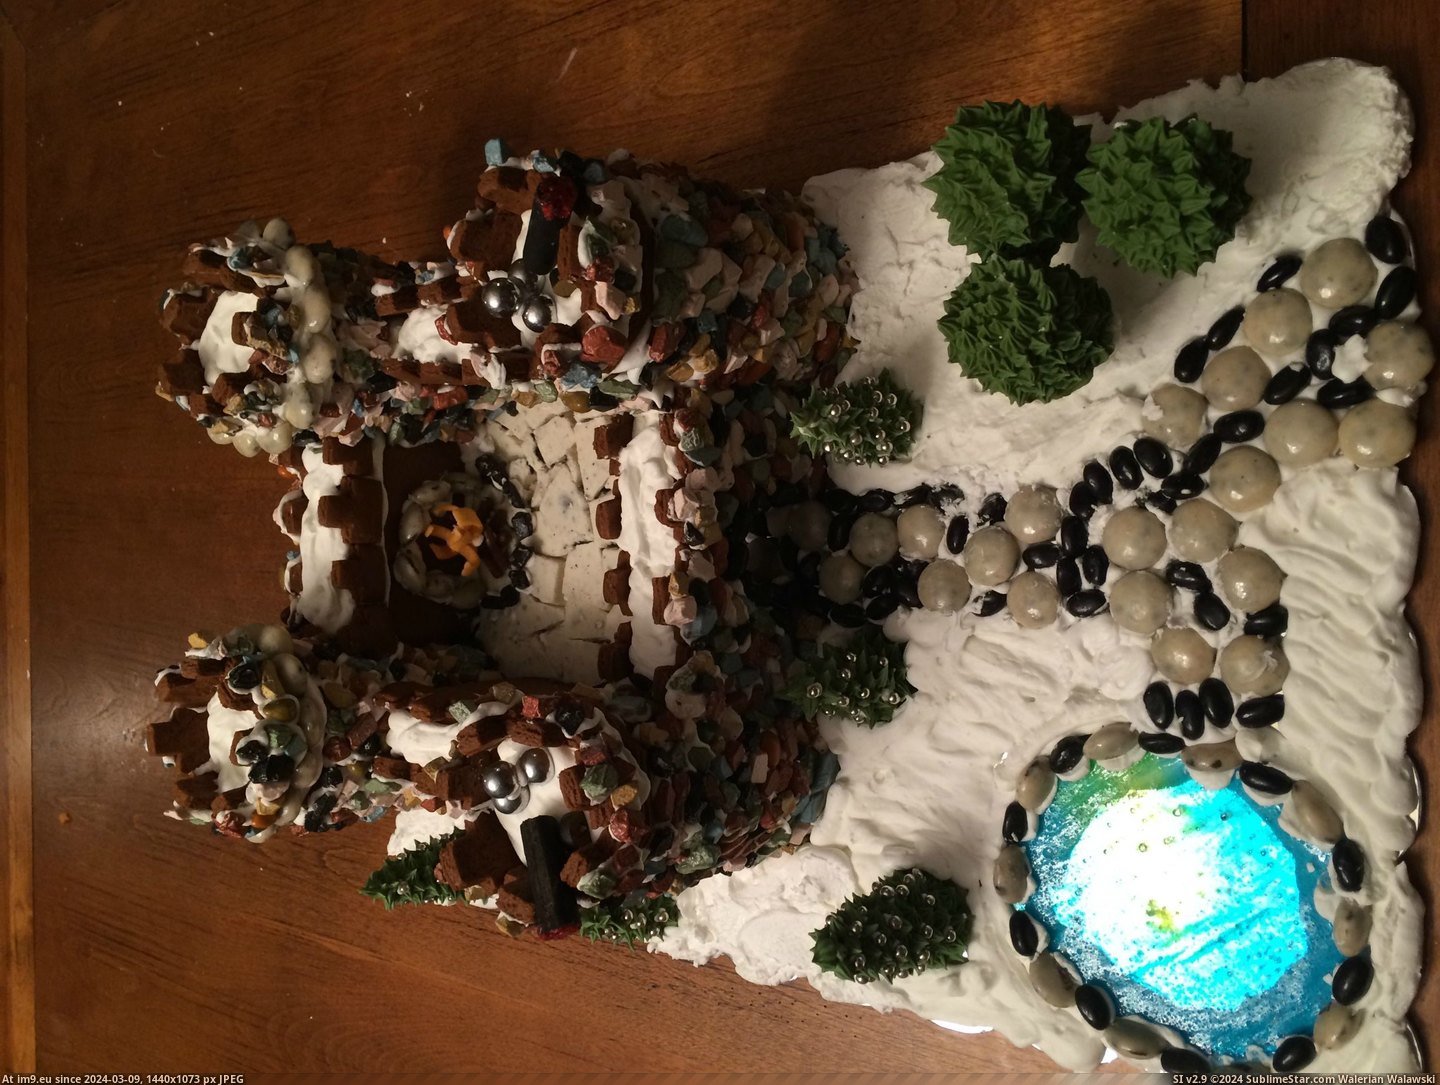 #Husband #Get #Our #Divorced #Collaborated #Project #Gingerbread #Success [Pics] My husband and I collaborated on our first gingerbread project and didn't get divorced...success! 5 Pic. (Bild von album My r/PICS favs))